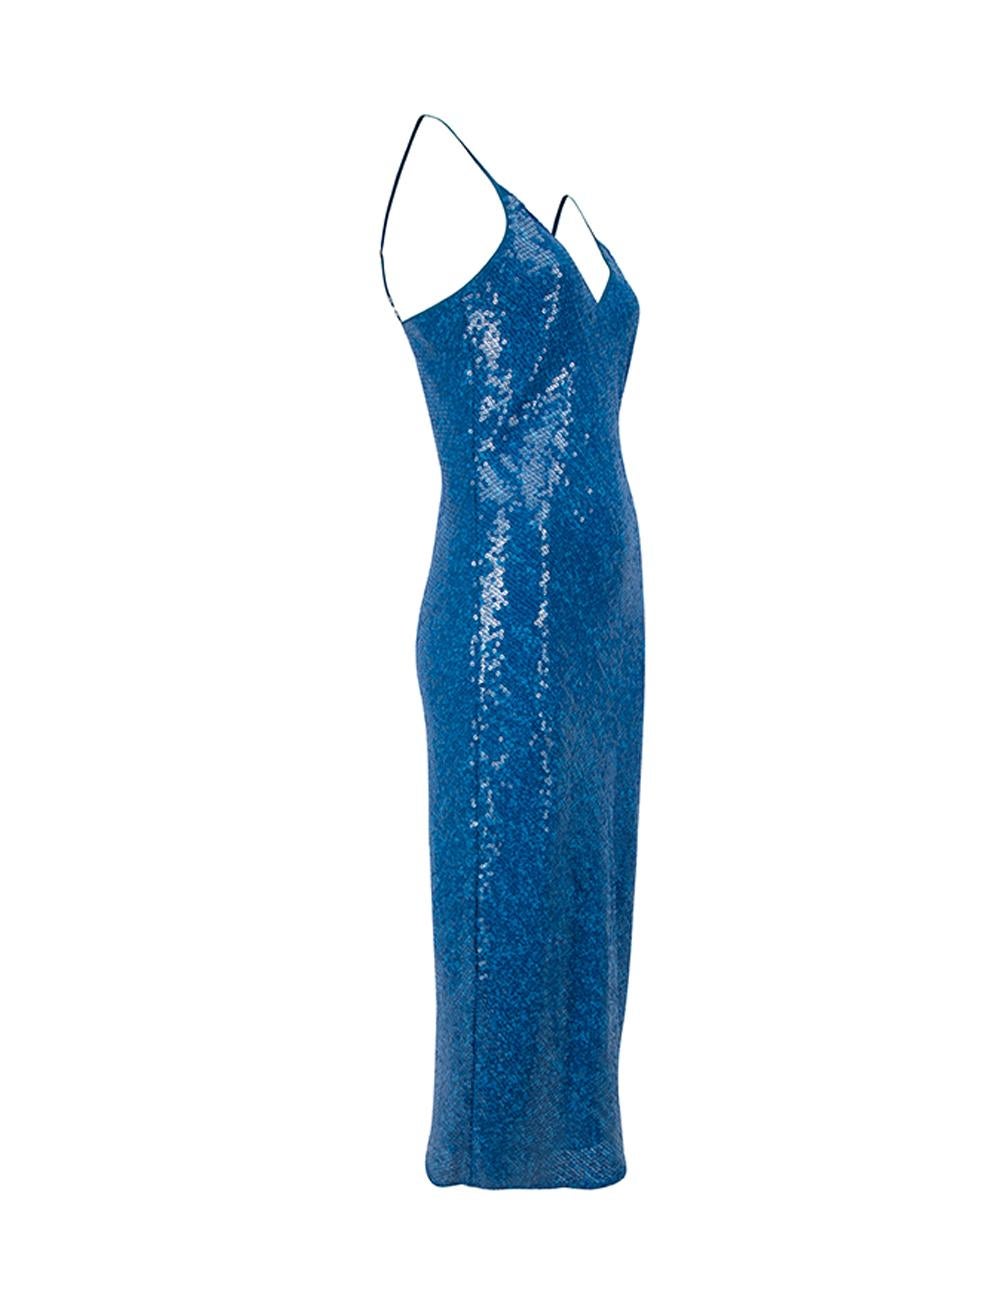 CONDITION is Never worn, with tags. No visible wear is evident on this brand new Diane Von Furstenberg designer resale item. Details Blue Silk Slip midi dress Sequinned V neckline Adjustable shoulder straps Fully lined Made in China Composition 100%